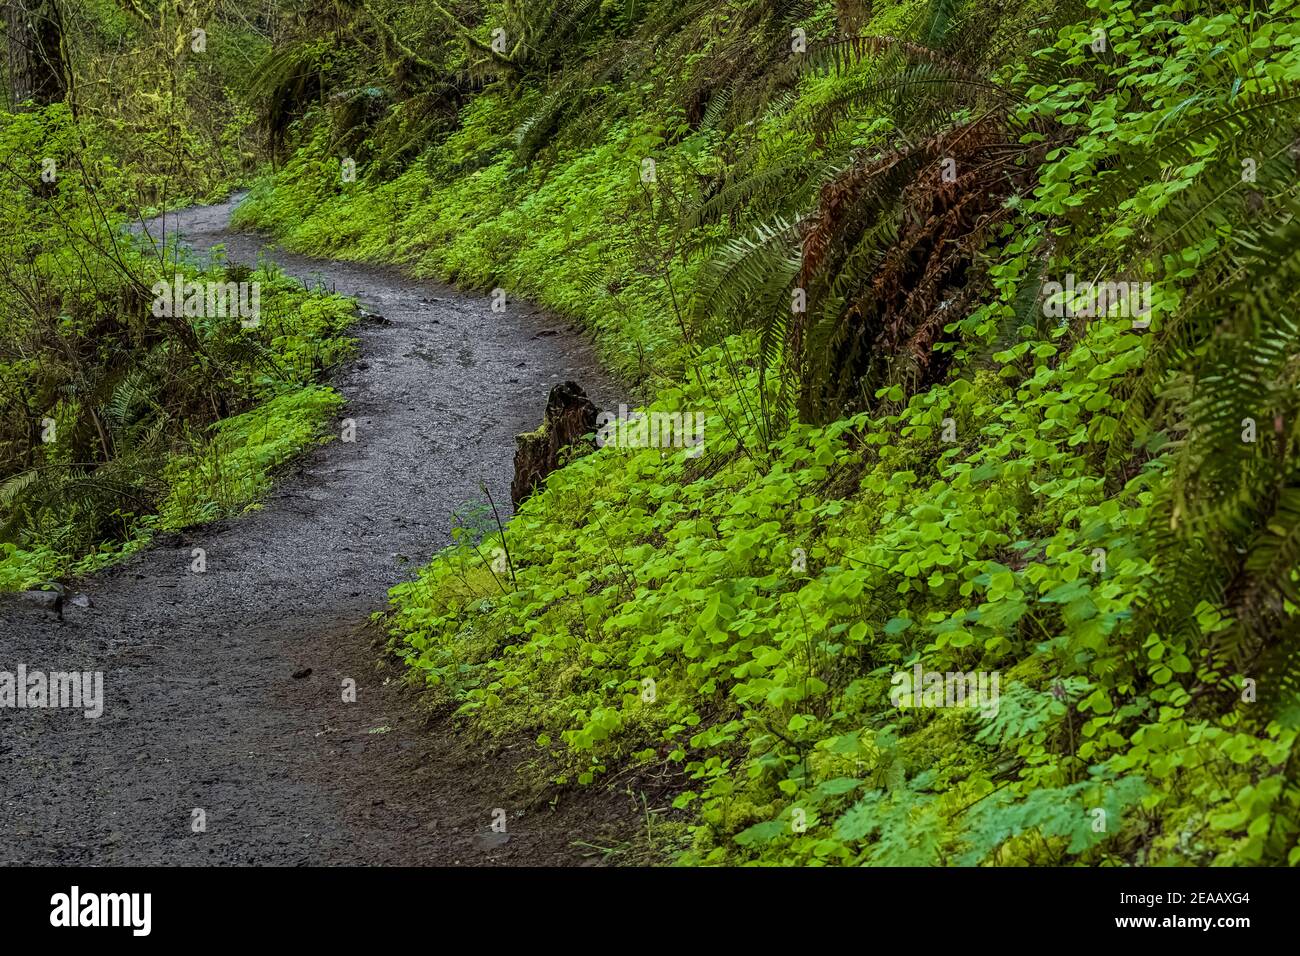 Trail through the rich green forest of Silver Falls State Park, Oregon, USA Stock Photo